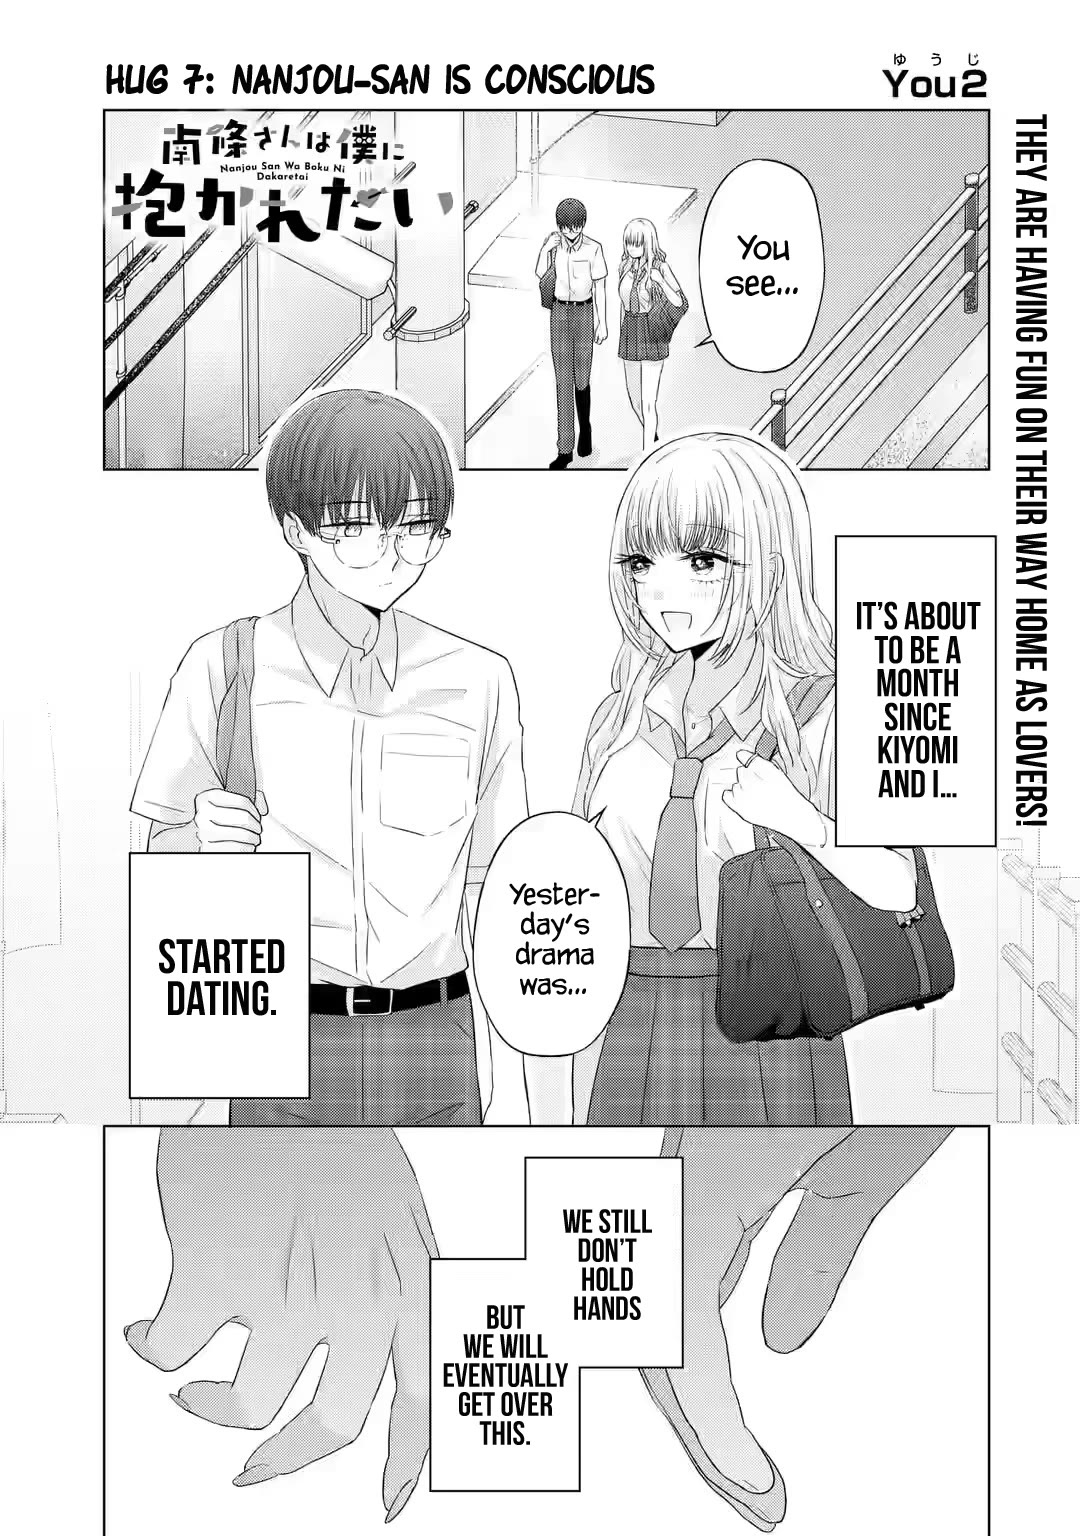 Nanjou-san Wants to Be Held by Me - chapter 7 - #2